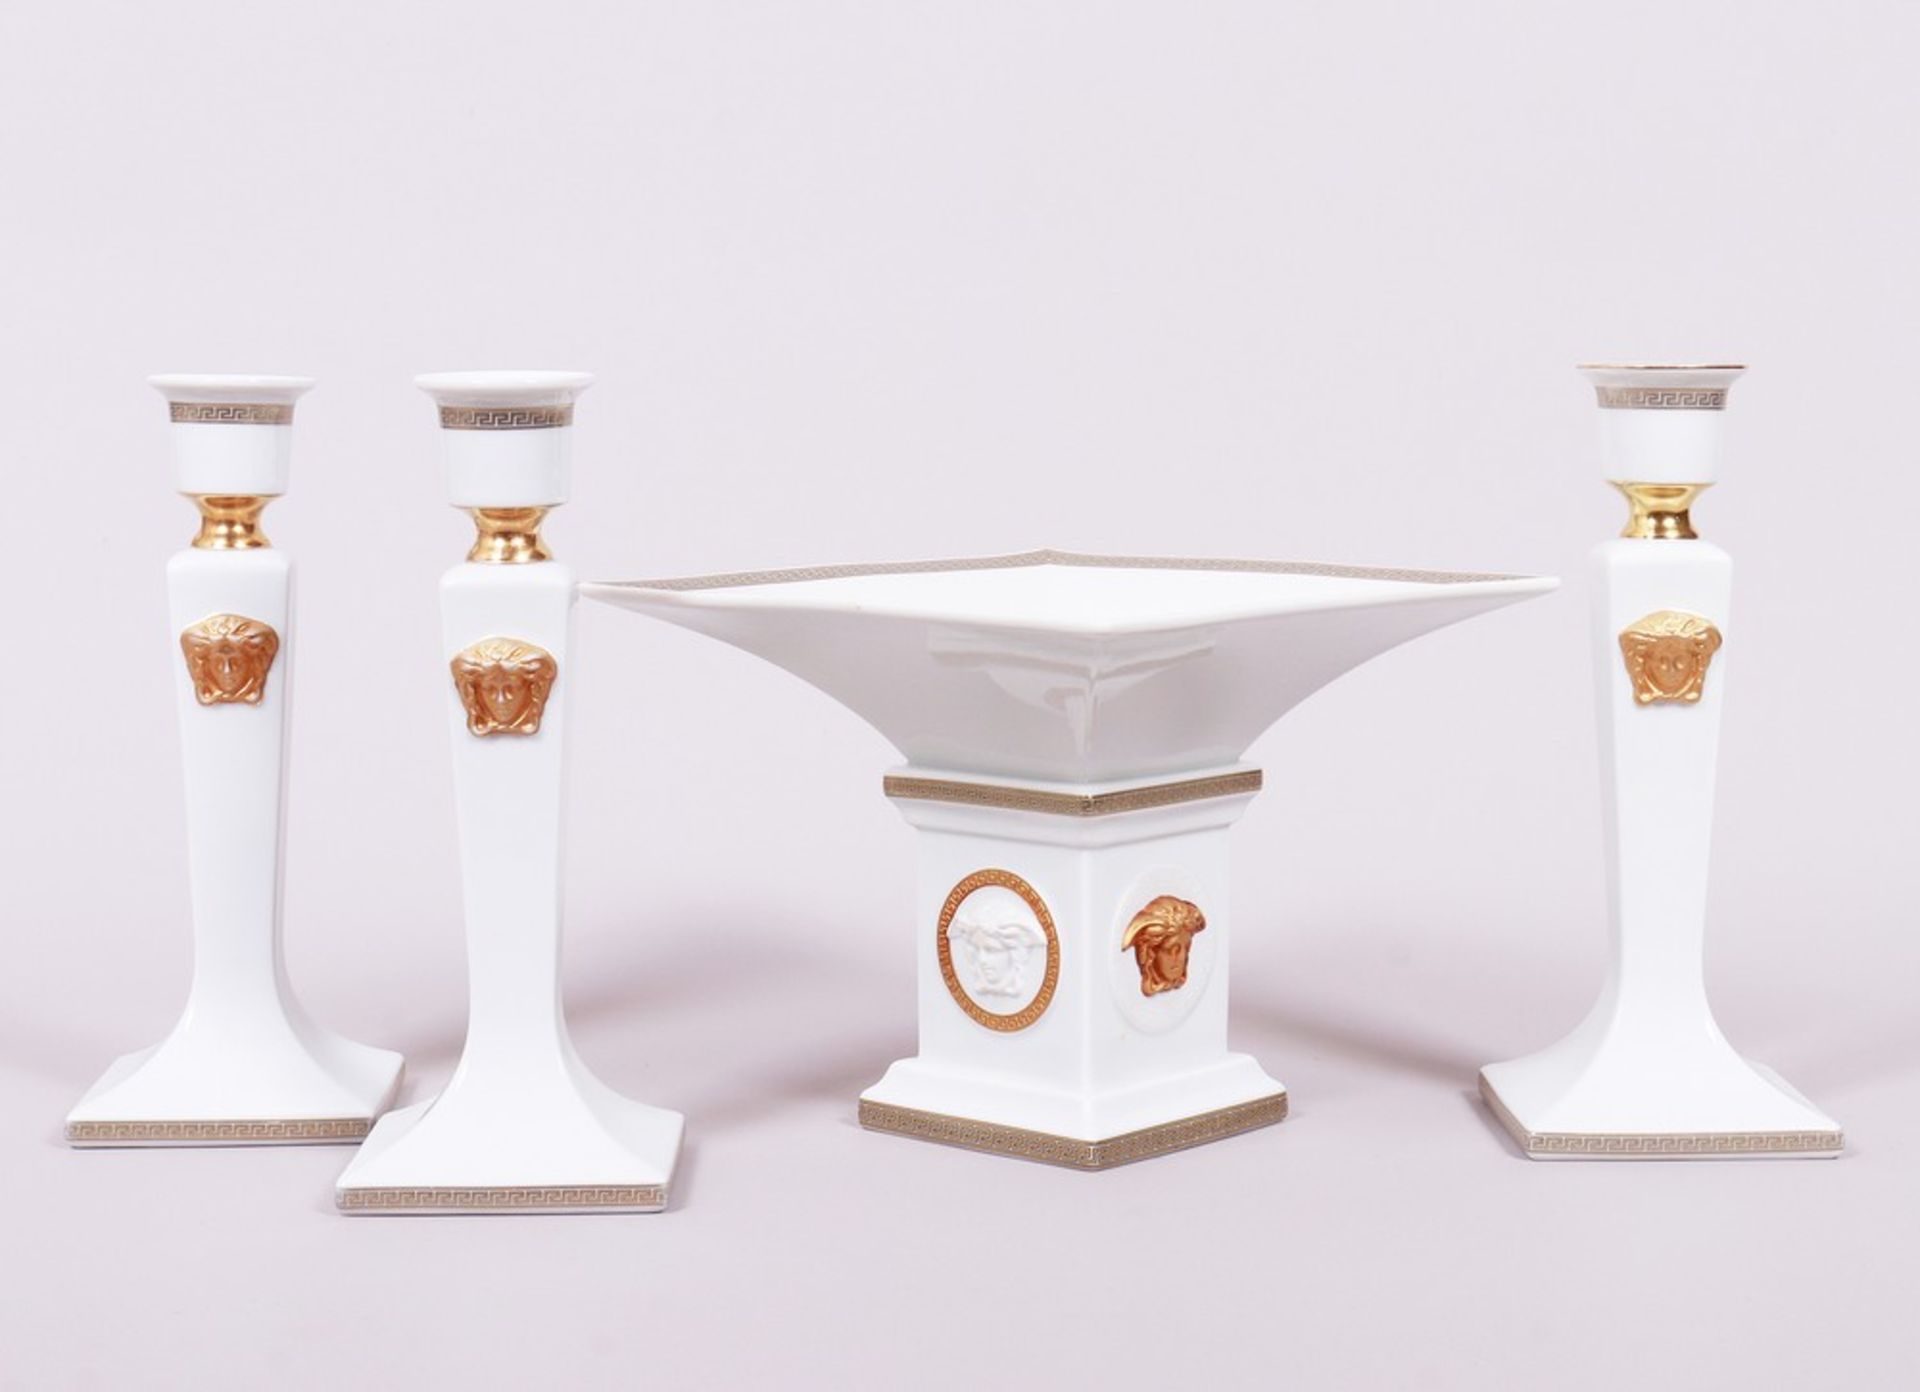 Footed bowl and three candlesticks, design “Ikarus” by Paul Wunderlich/decor “Gorgona” by Gianni Ve